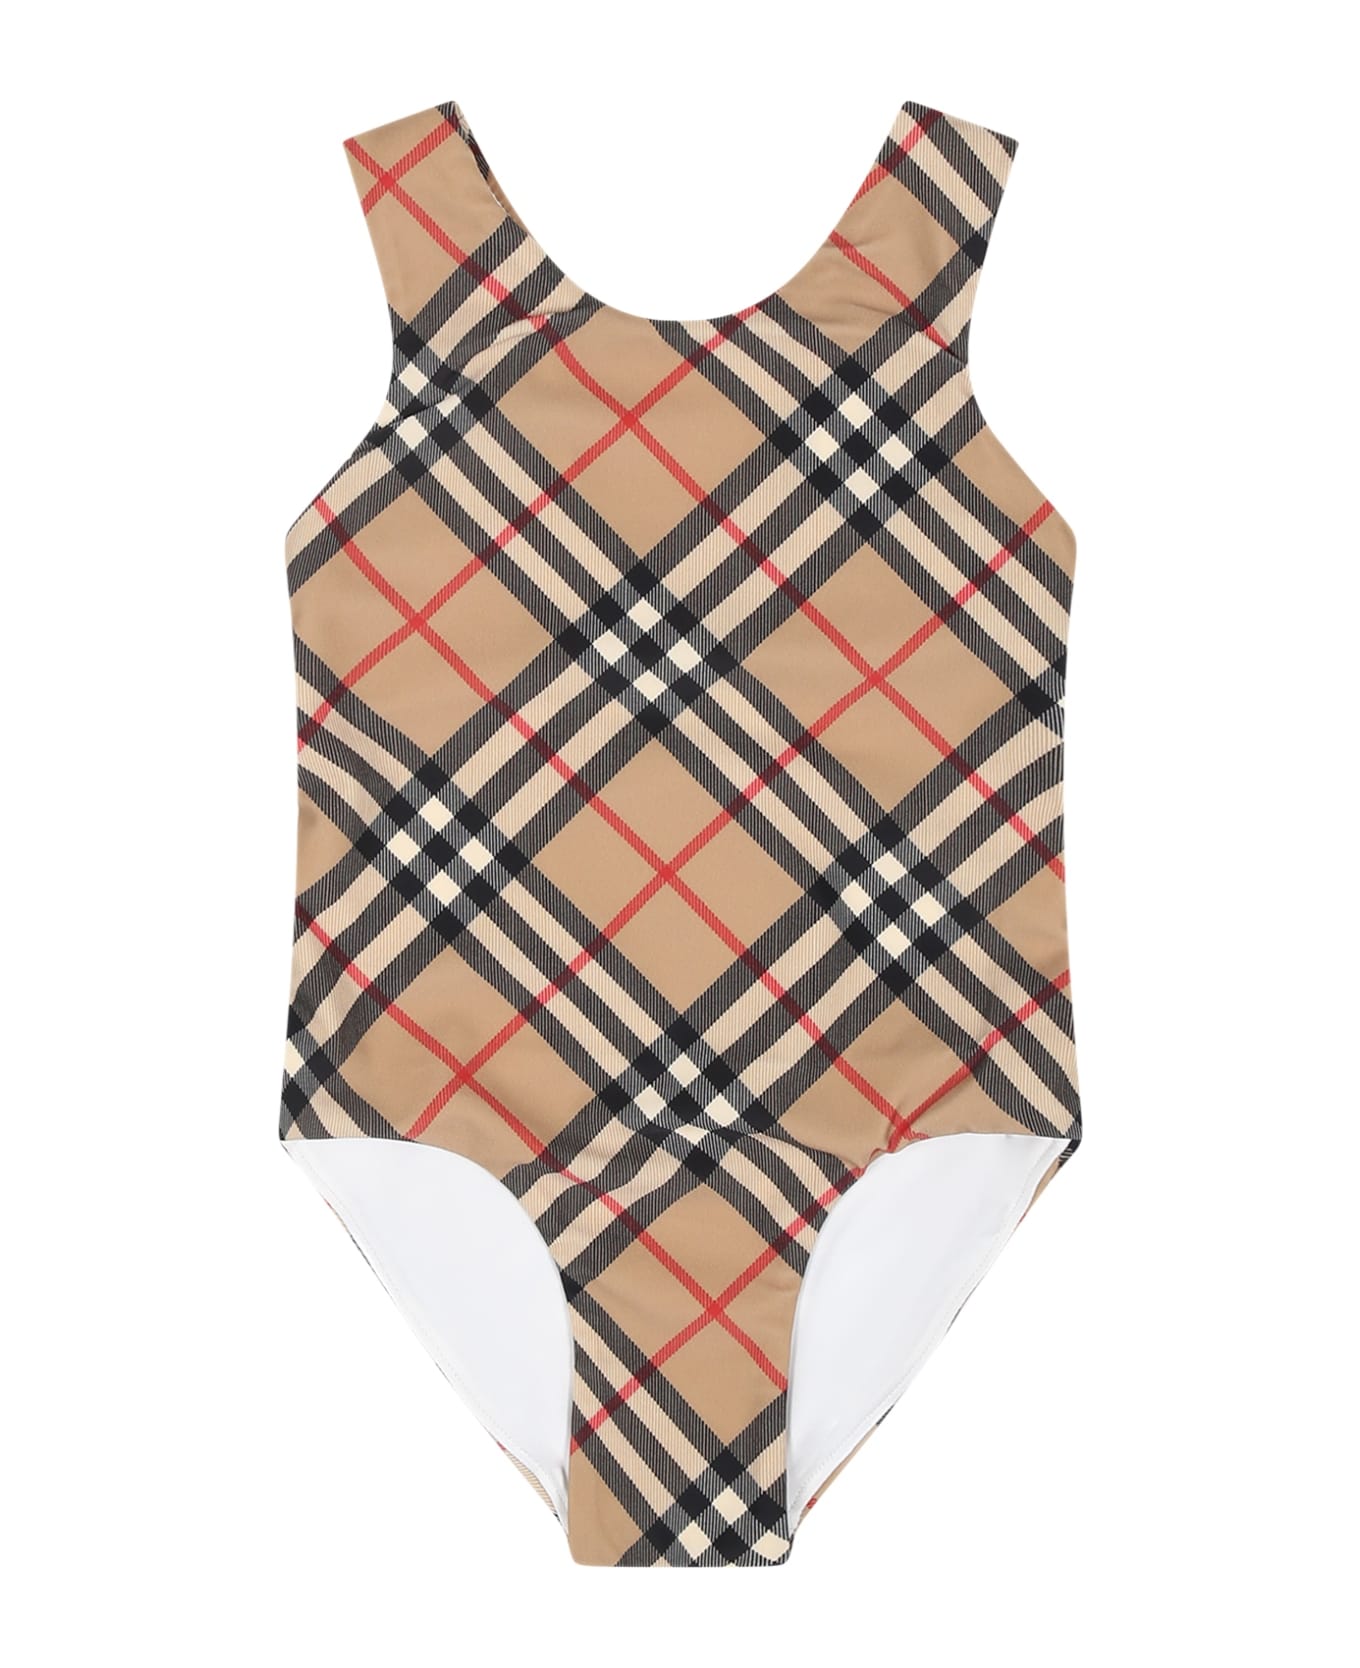 Burberry Beige Swimsuit For Baby Girl With Iconic Check - Archive Beige Ip Check 水着